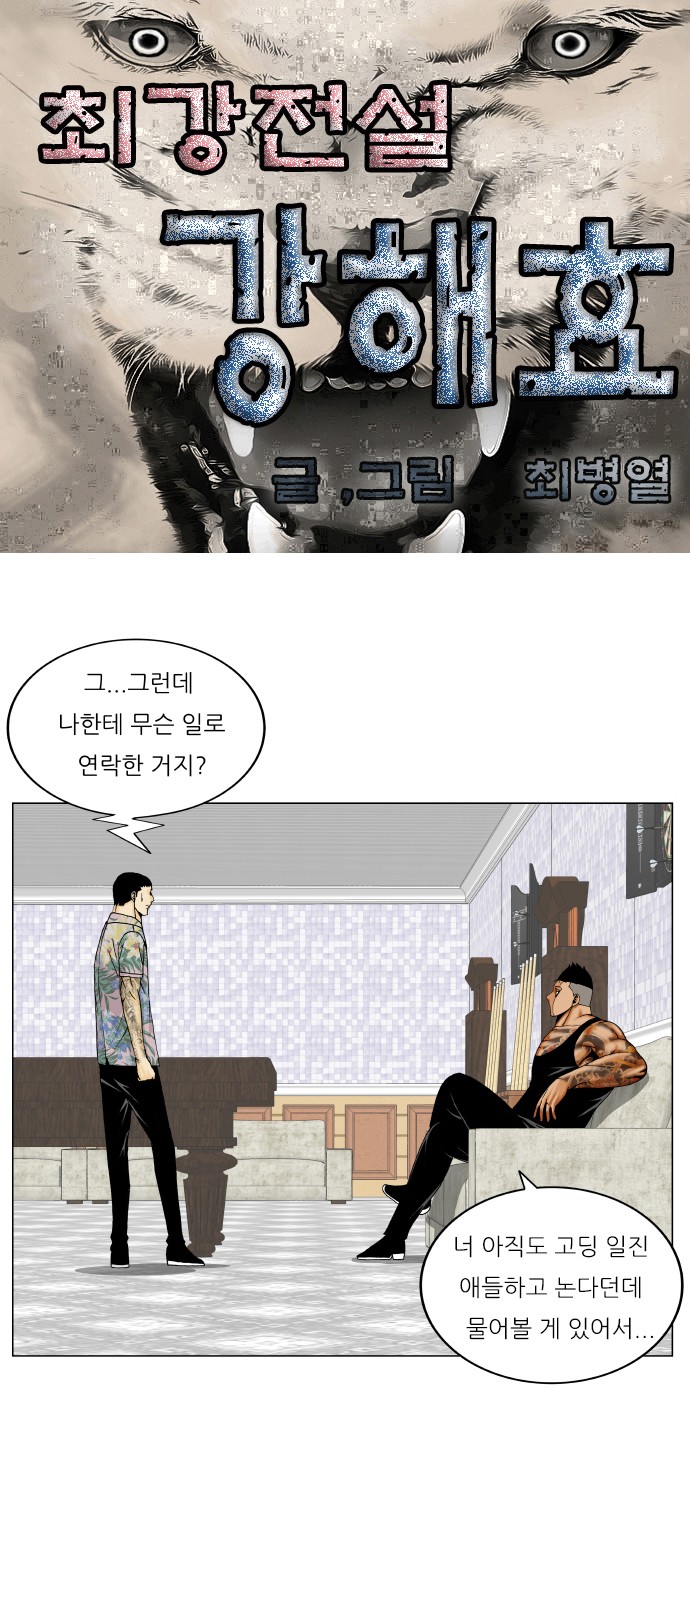 Ultimate Legend - Kang Hae Hyo - Chapter 271 - Page 1